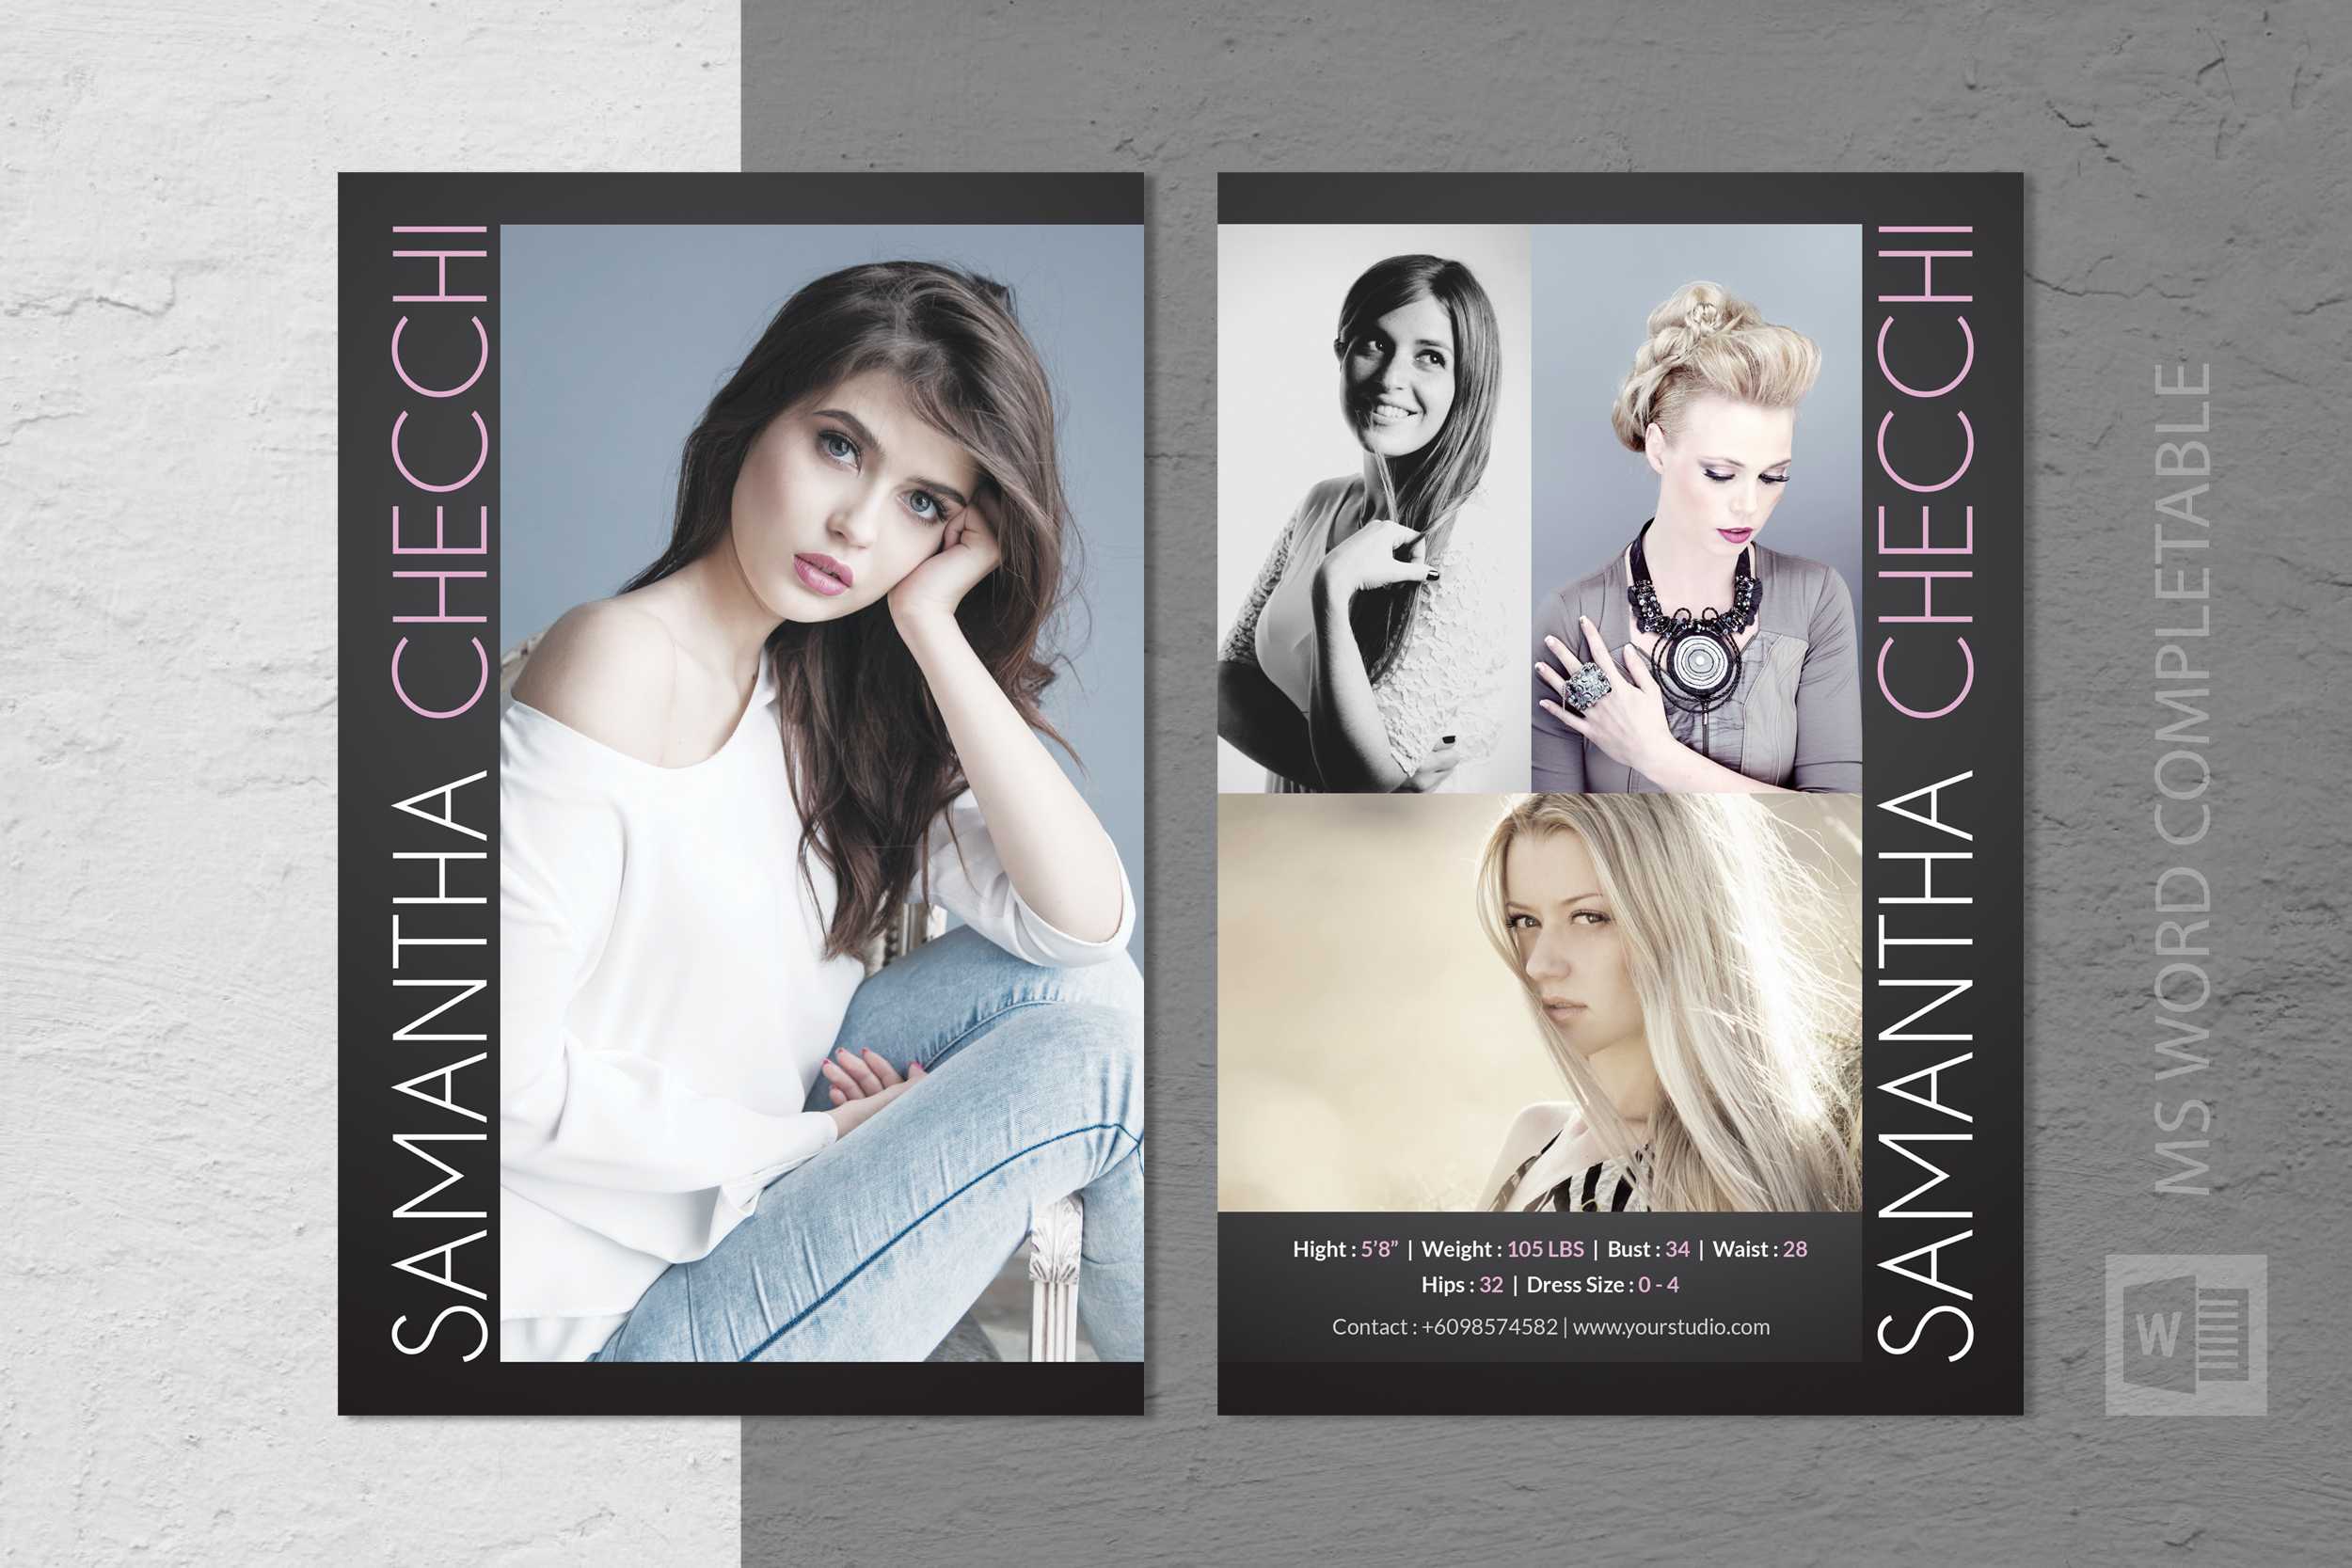 015 Model Comp Card Template Ideas Outstanding Psd Free Throughout Model Comp Card Template Free